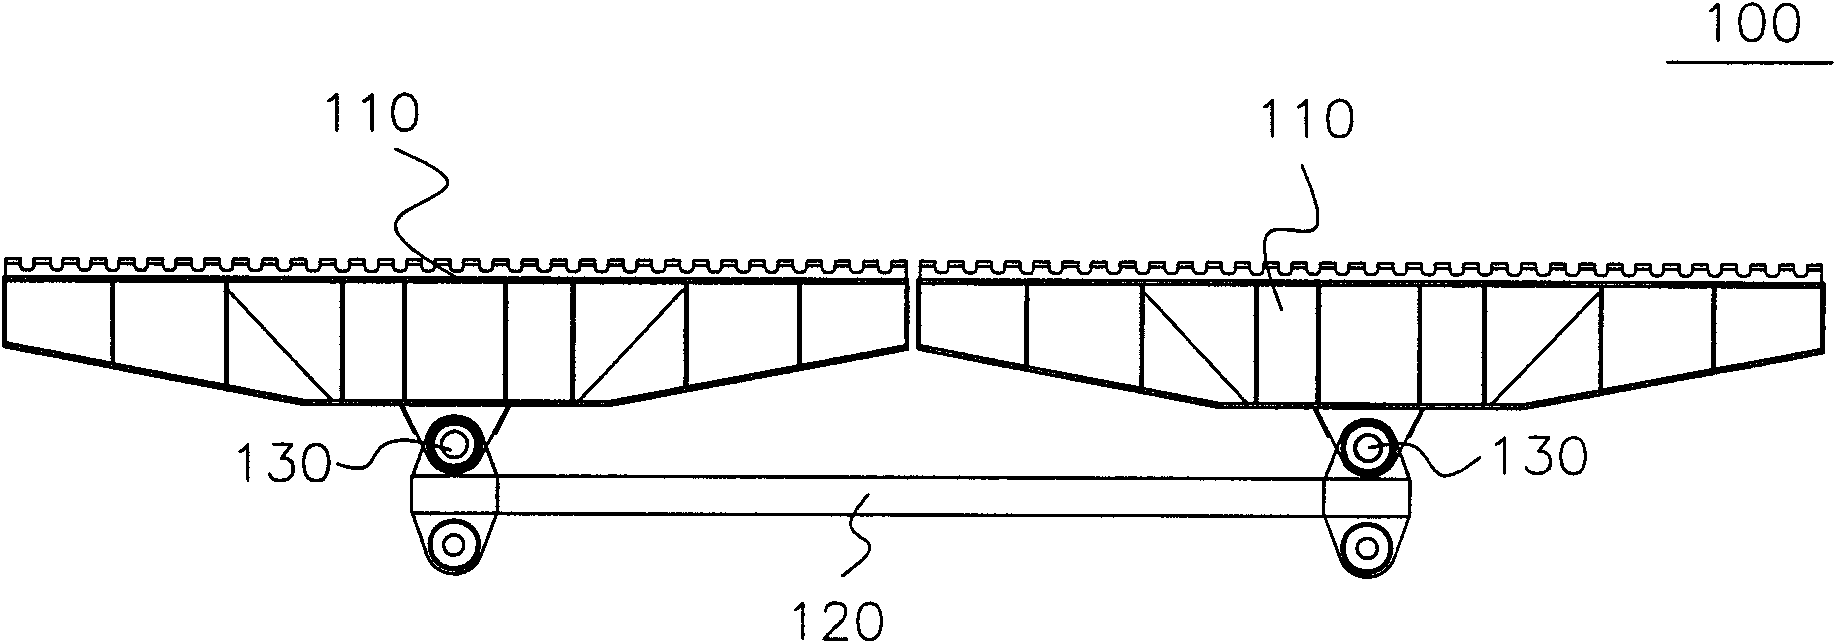 Method for installing combined hoisting beam, combined hoist and oil production platform drilling equipment